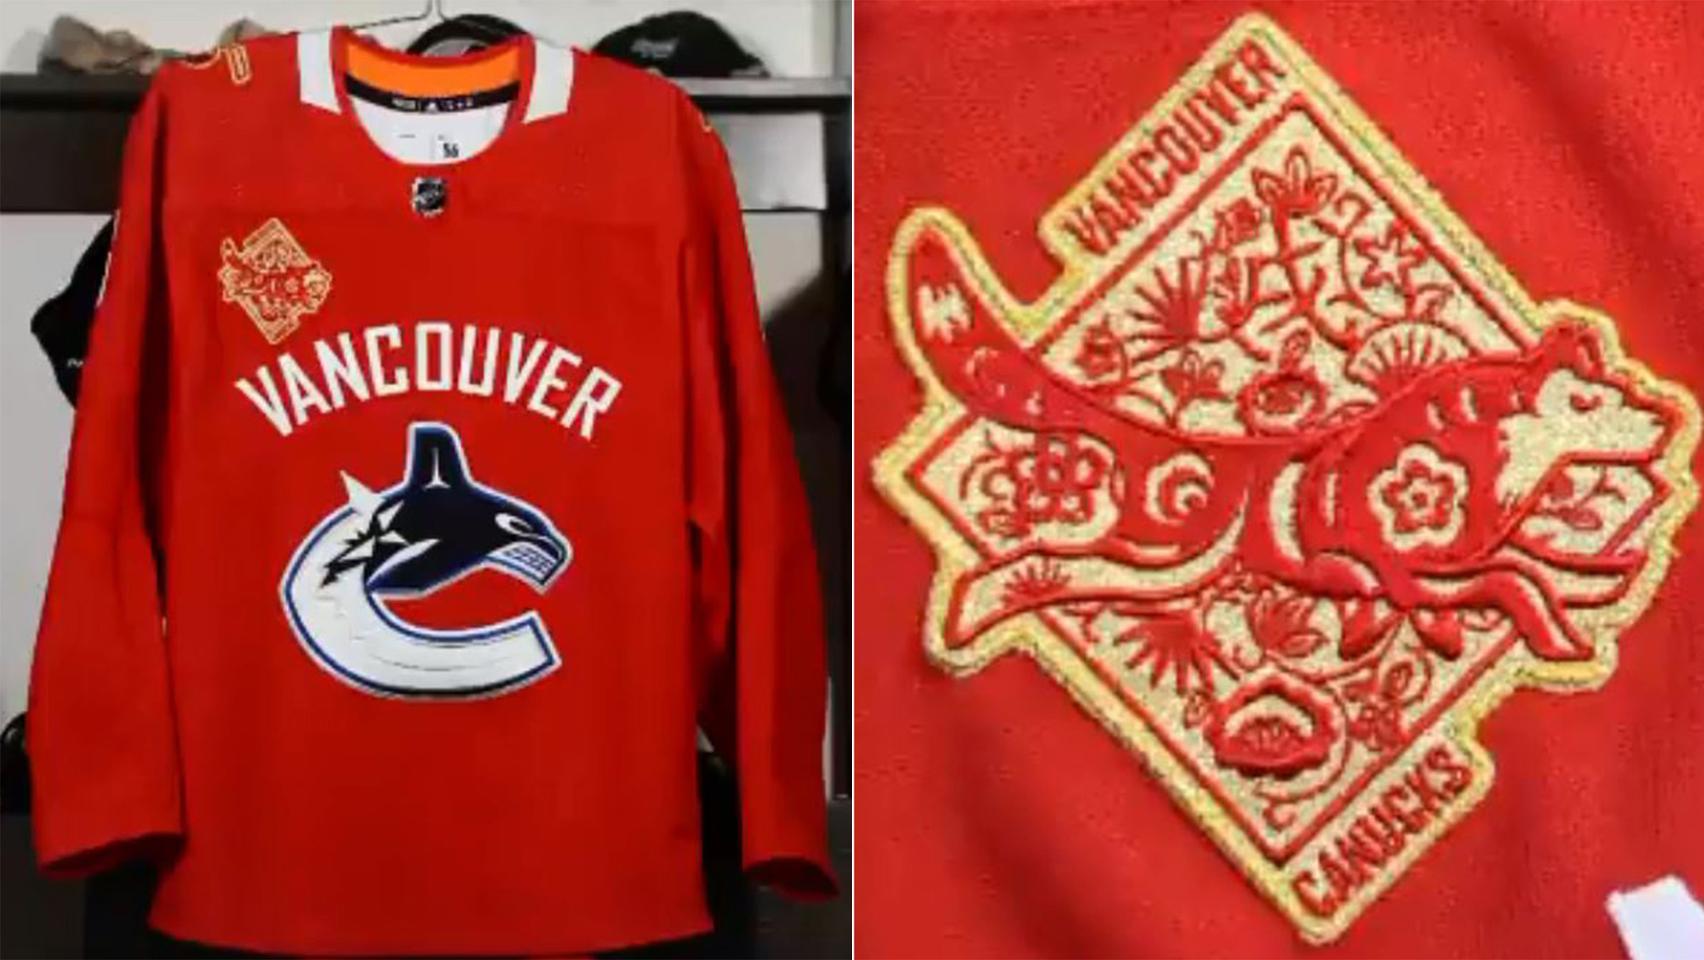 Vancouver Canucks will celebrate Chinese Lunar New Year with these